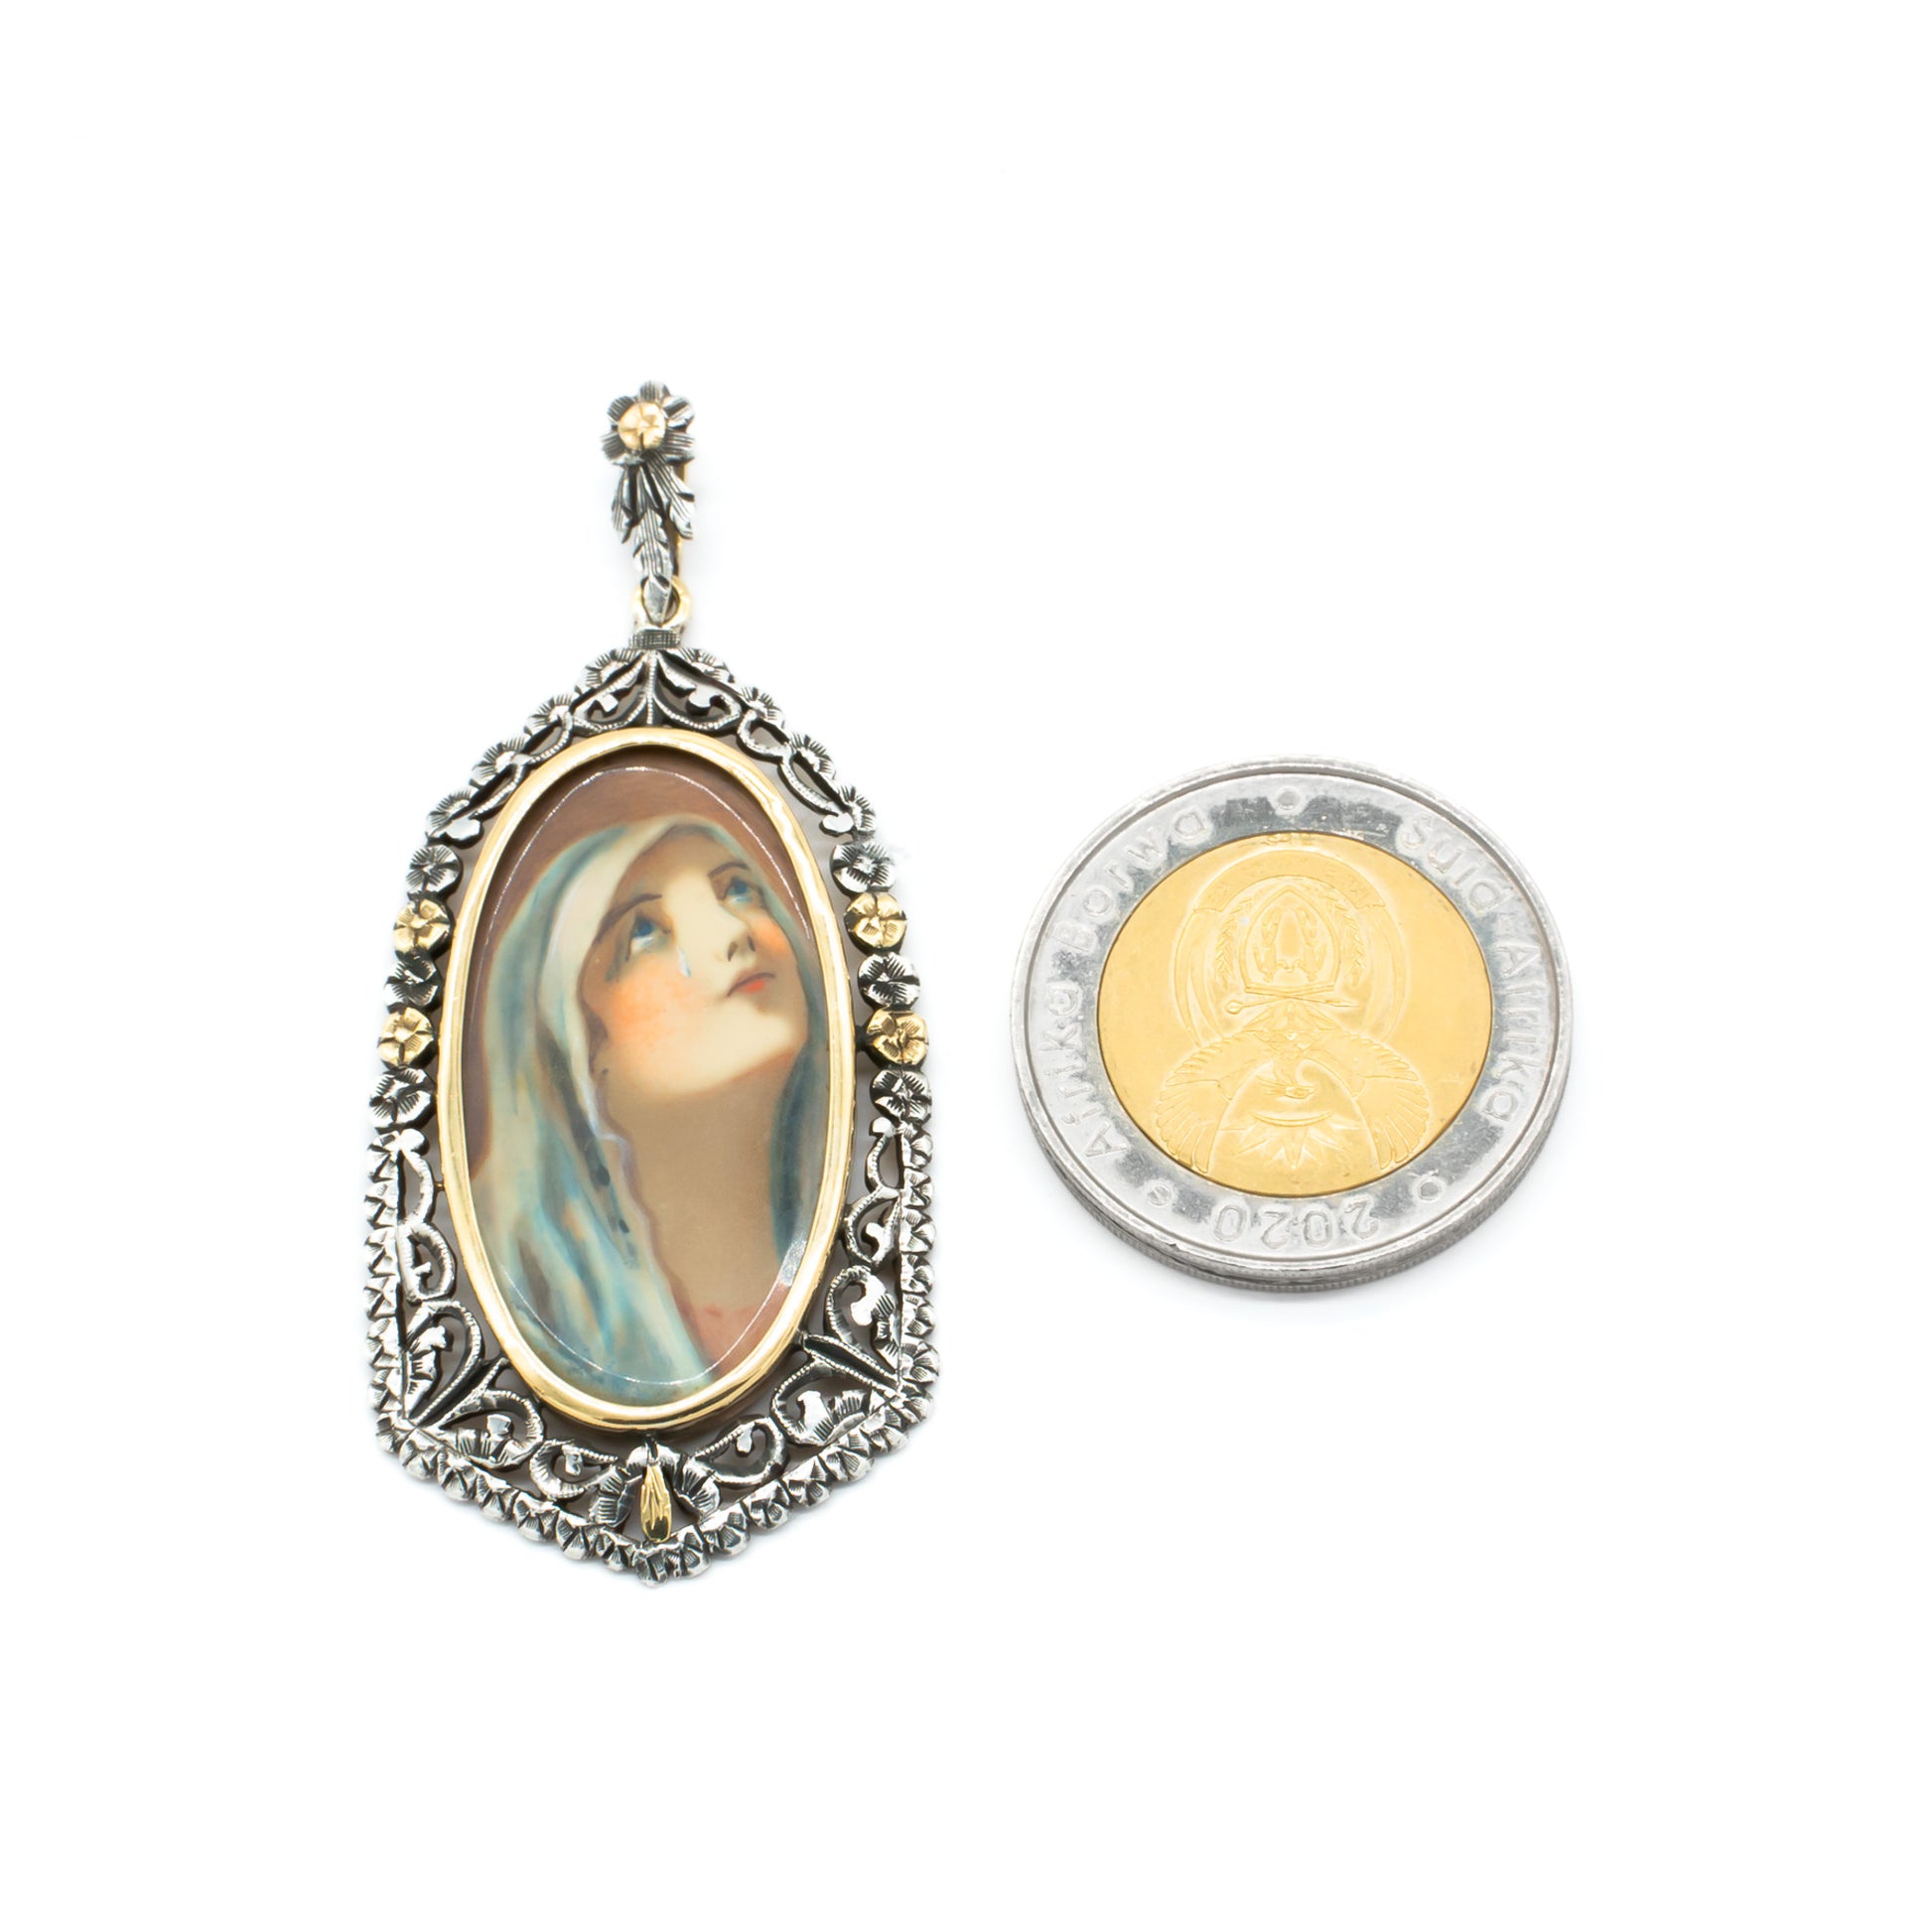 Beautifully hand-painted Victorian Madonna pendant set in an ornate, floral 18ct gold and silver frame.